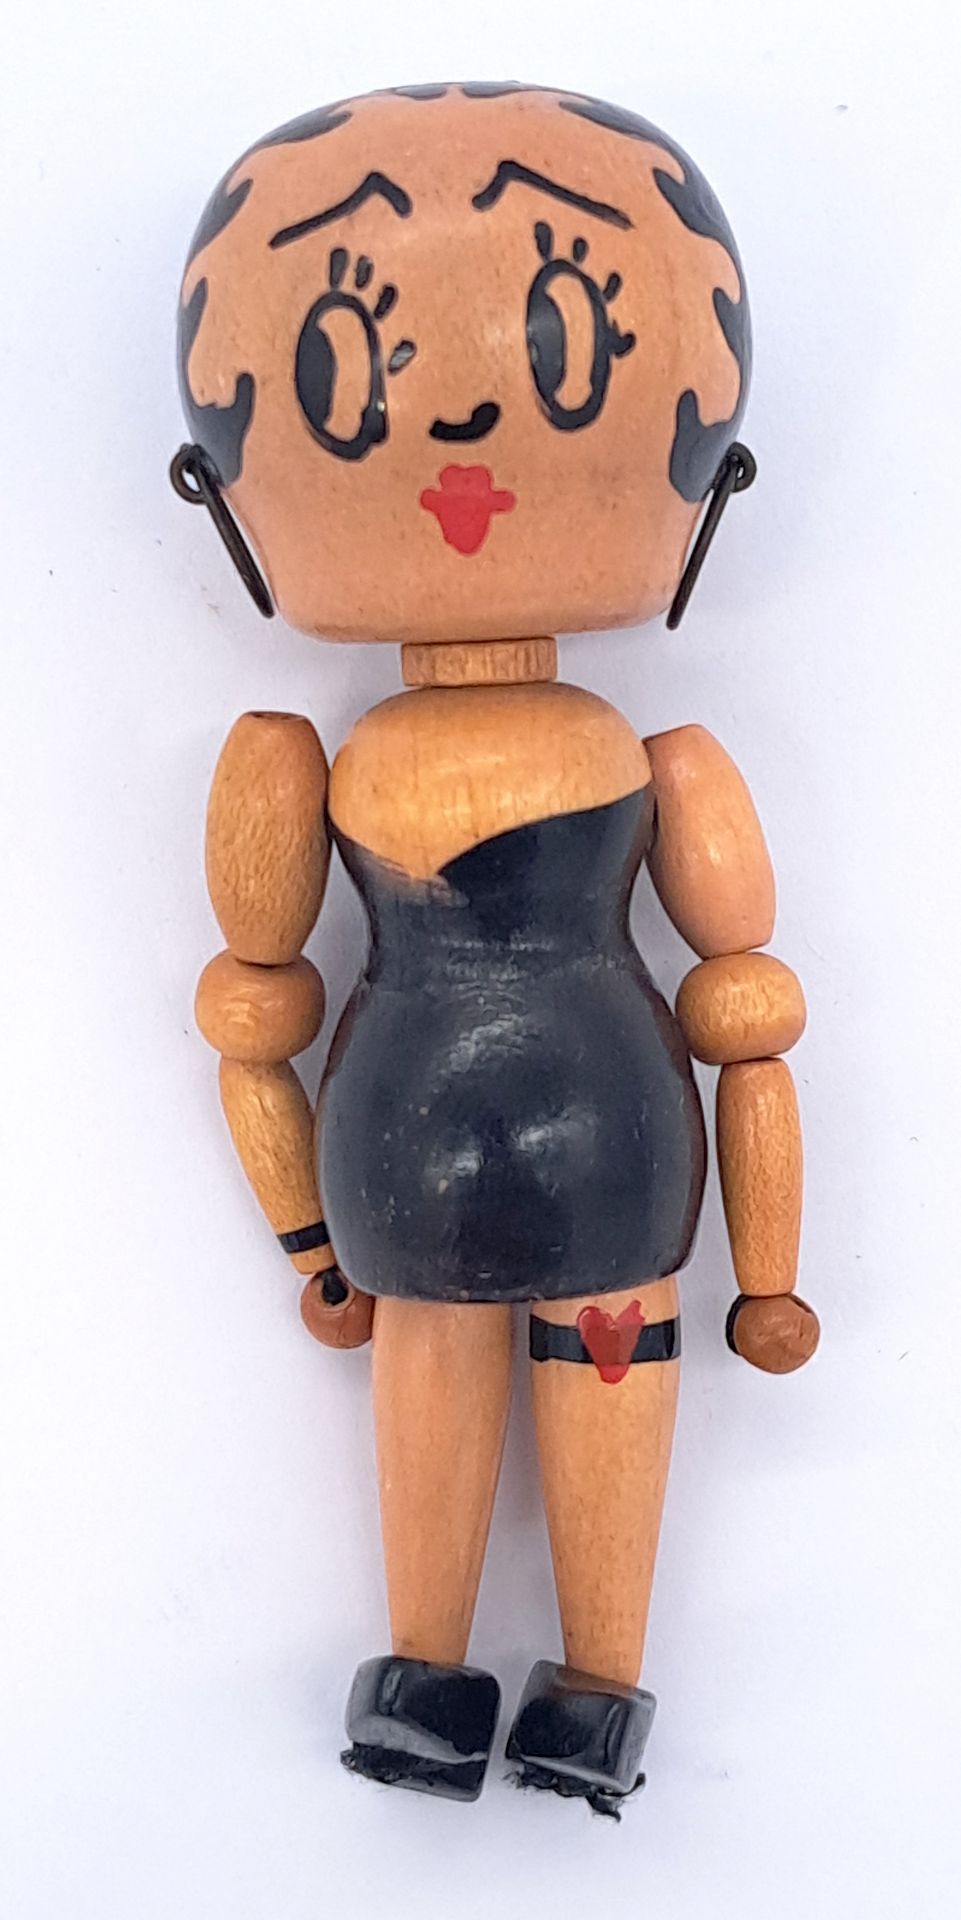 Betty Boop vintage wooden articulated figure